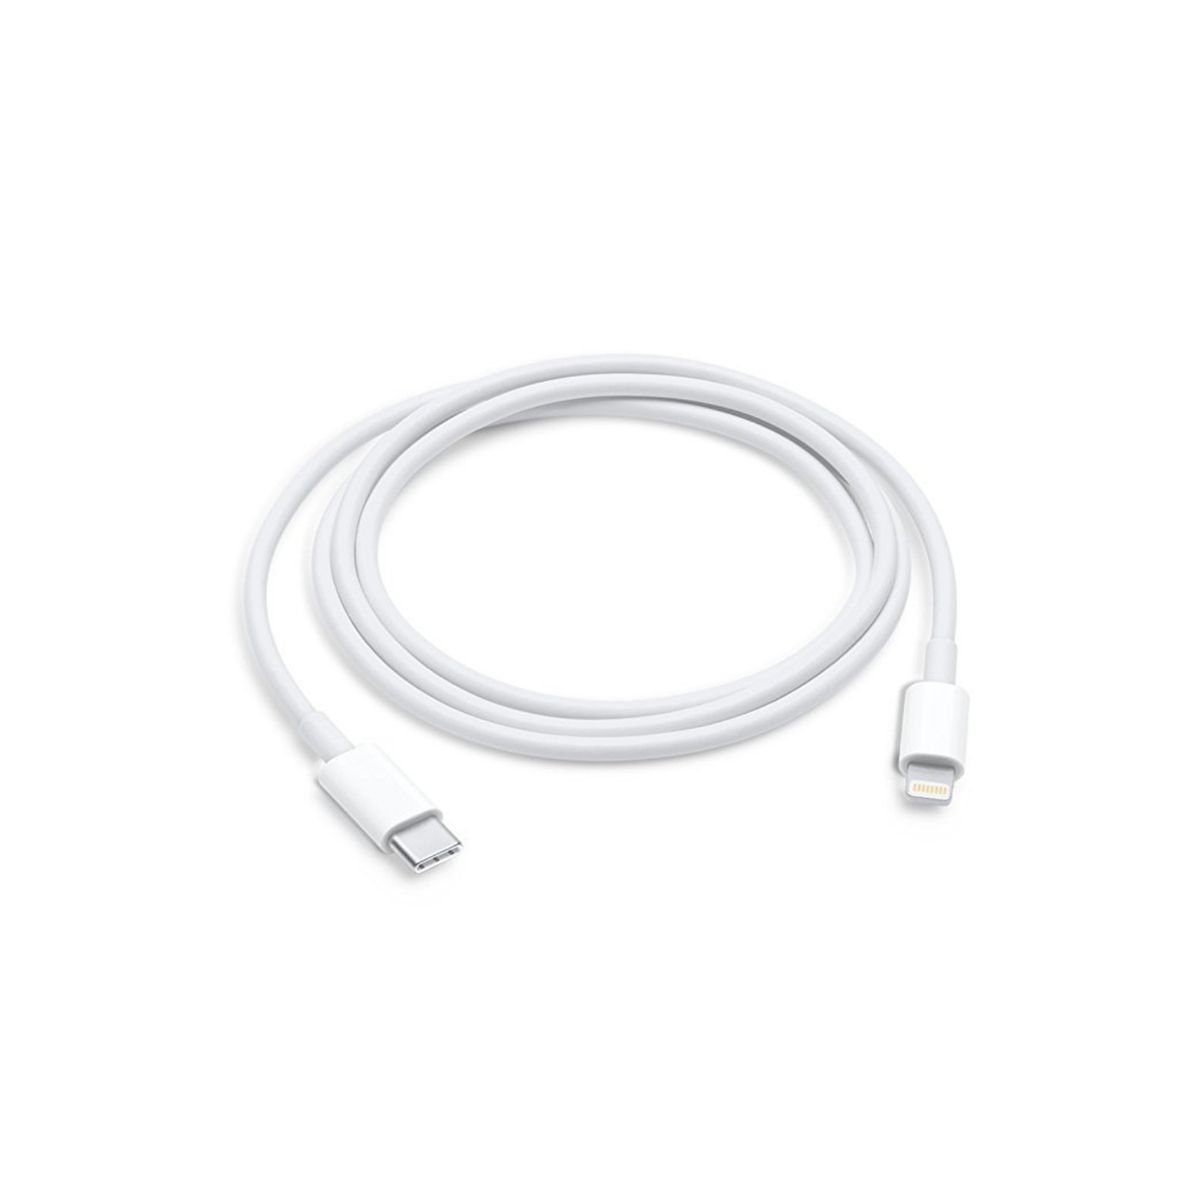 Apple USB-C to Lightning Cable 2M - MKQ42